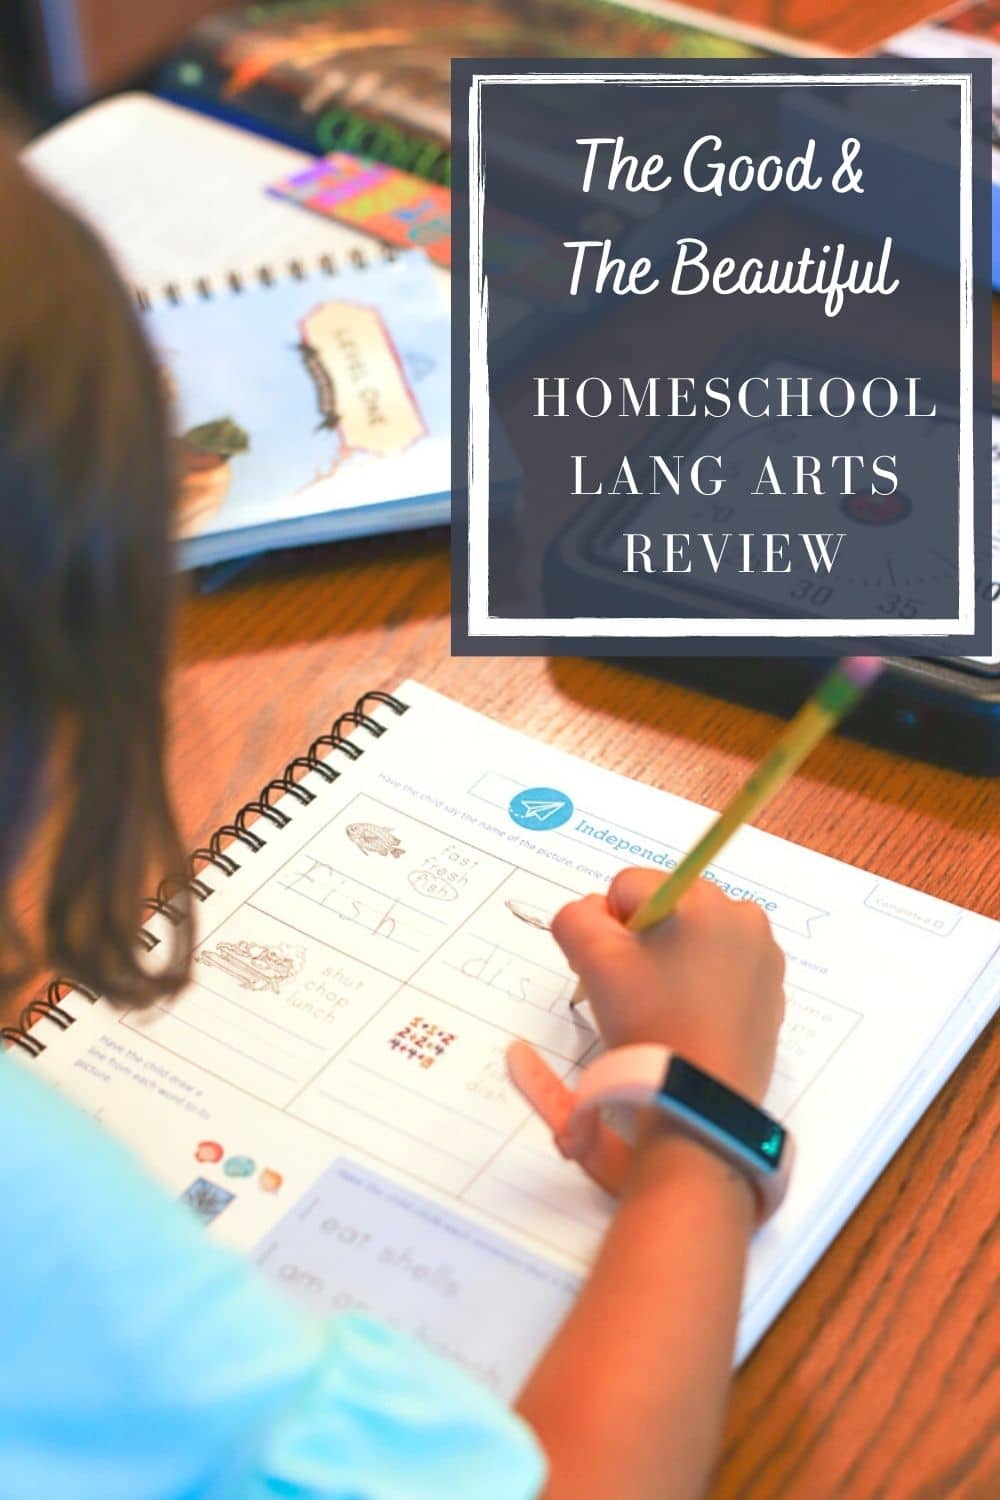 The Good & The Beautiful Language Arts Review- A Healthy Slice of Life